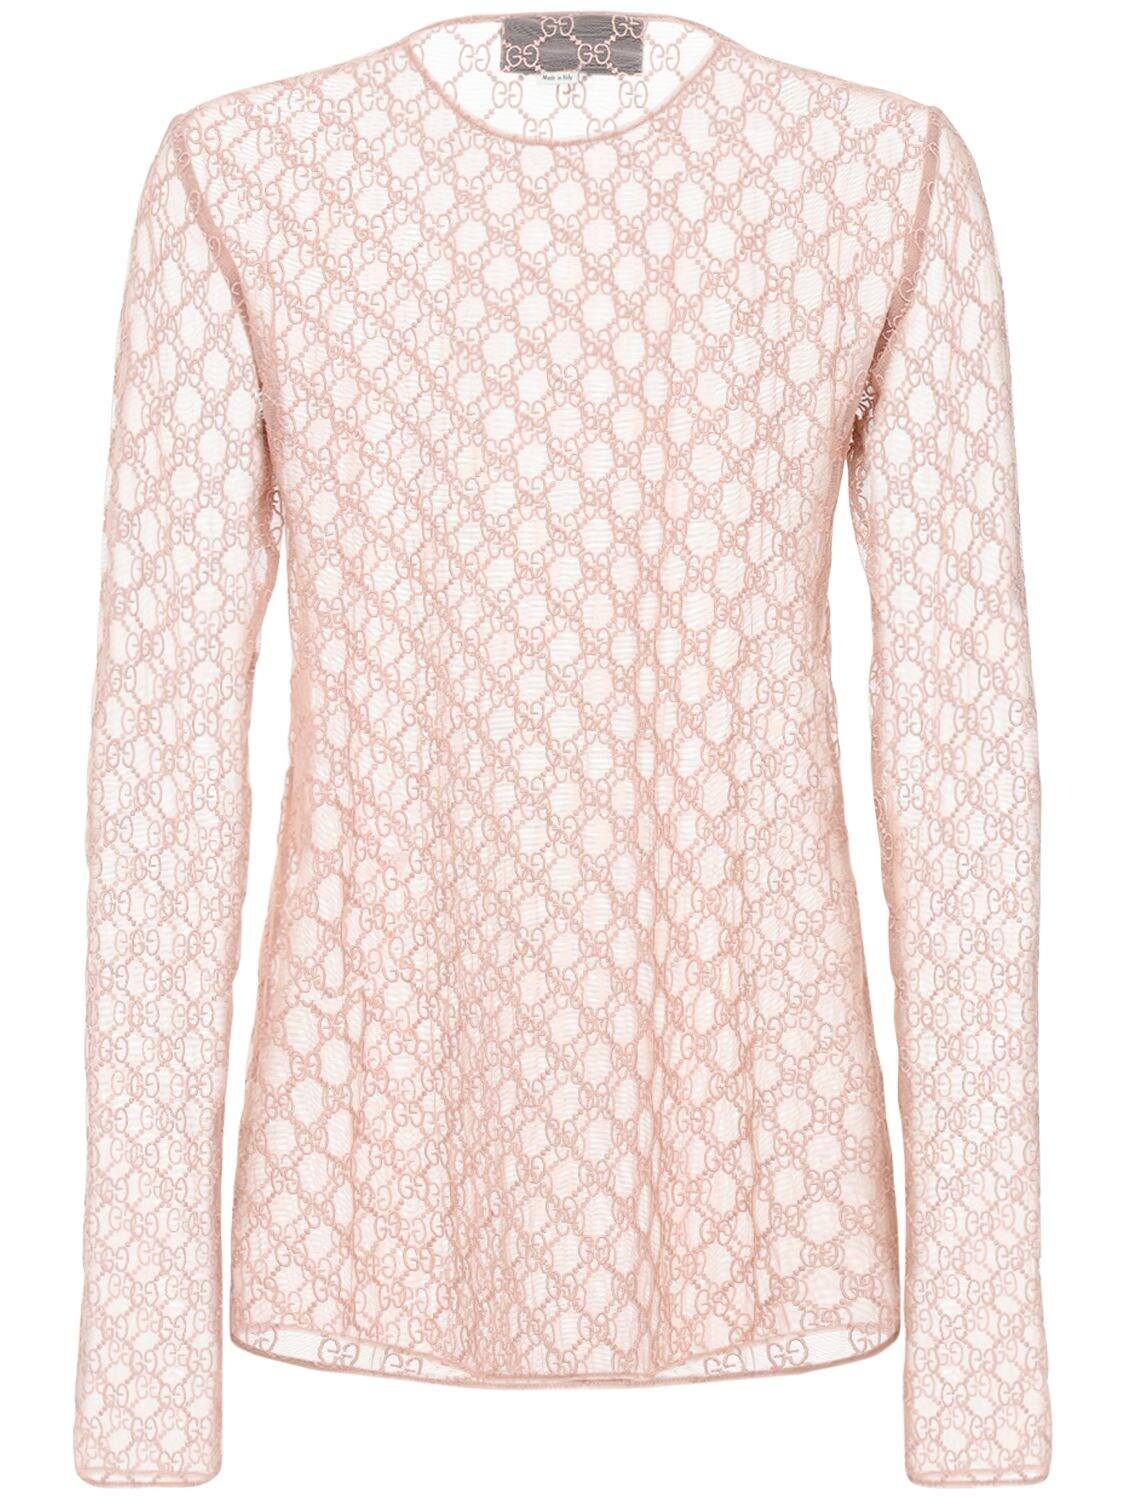 Gucci Gg Embroidered Tulle Top in Light Pink (Pink) - Lyst